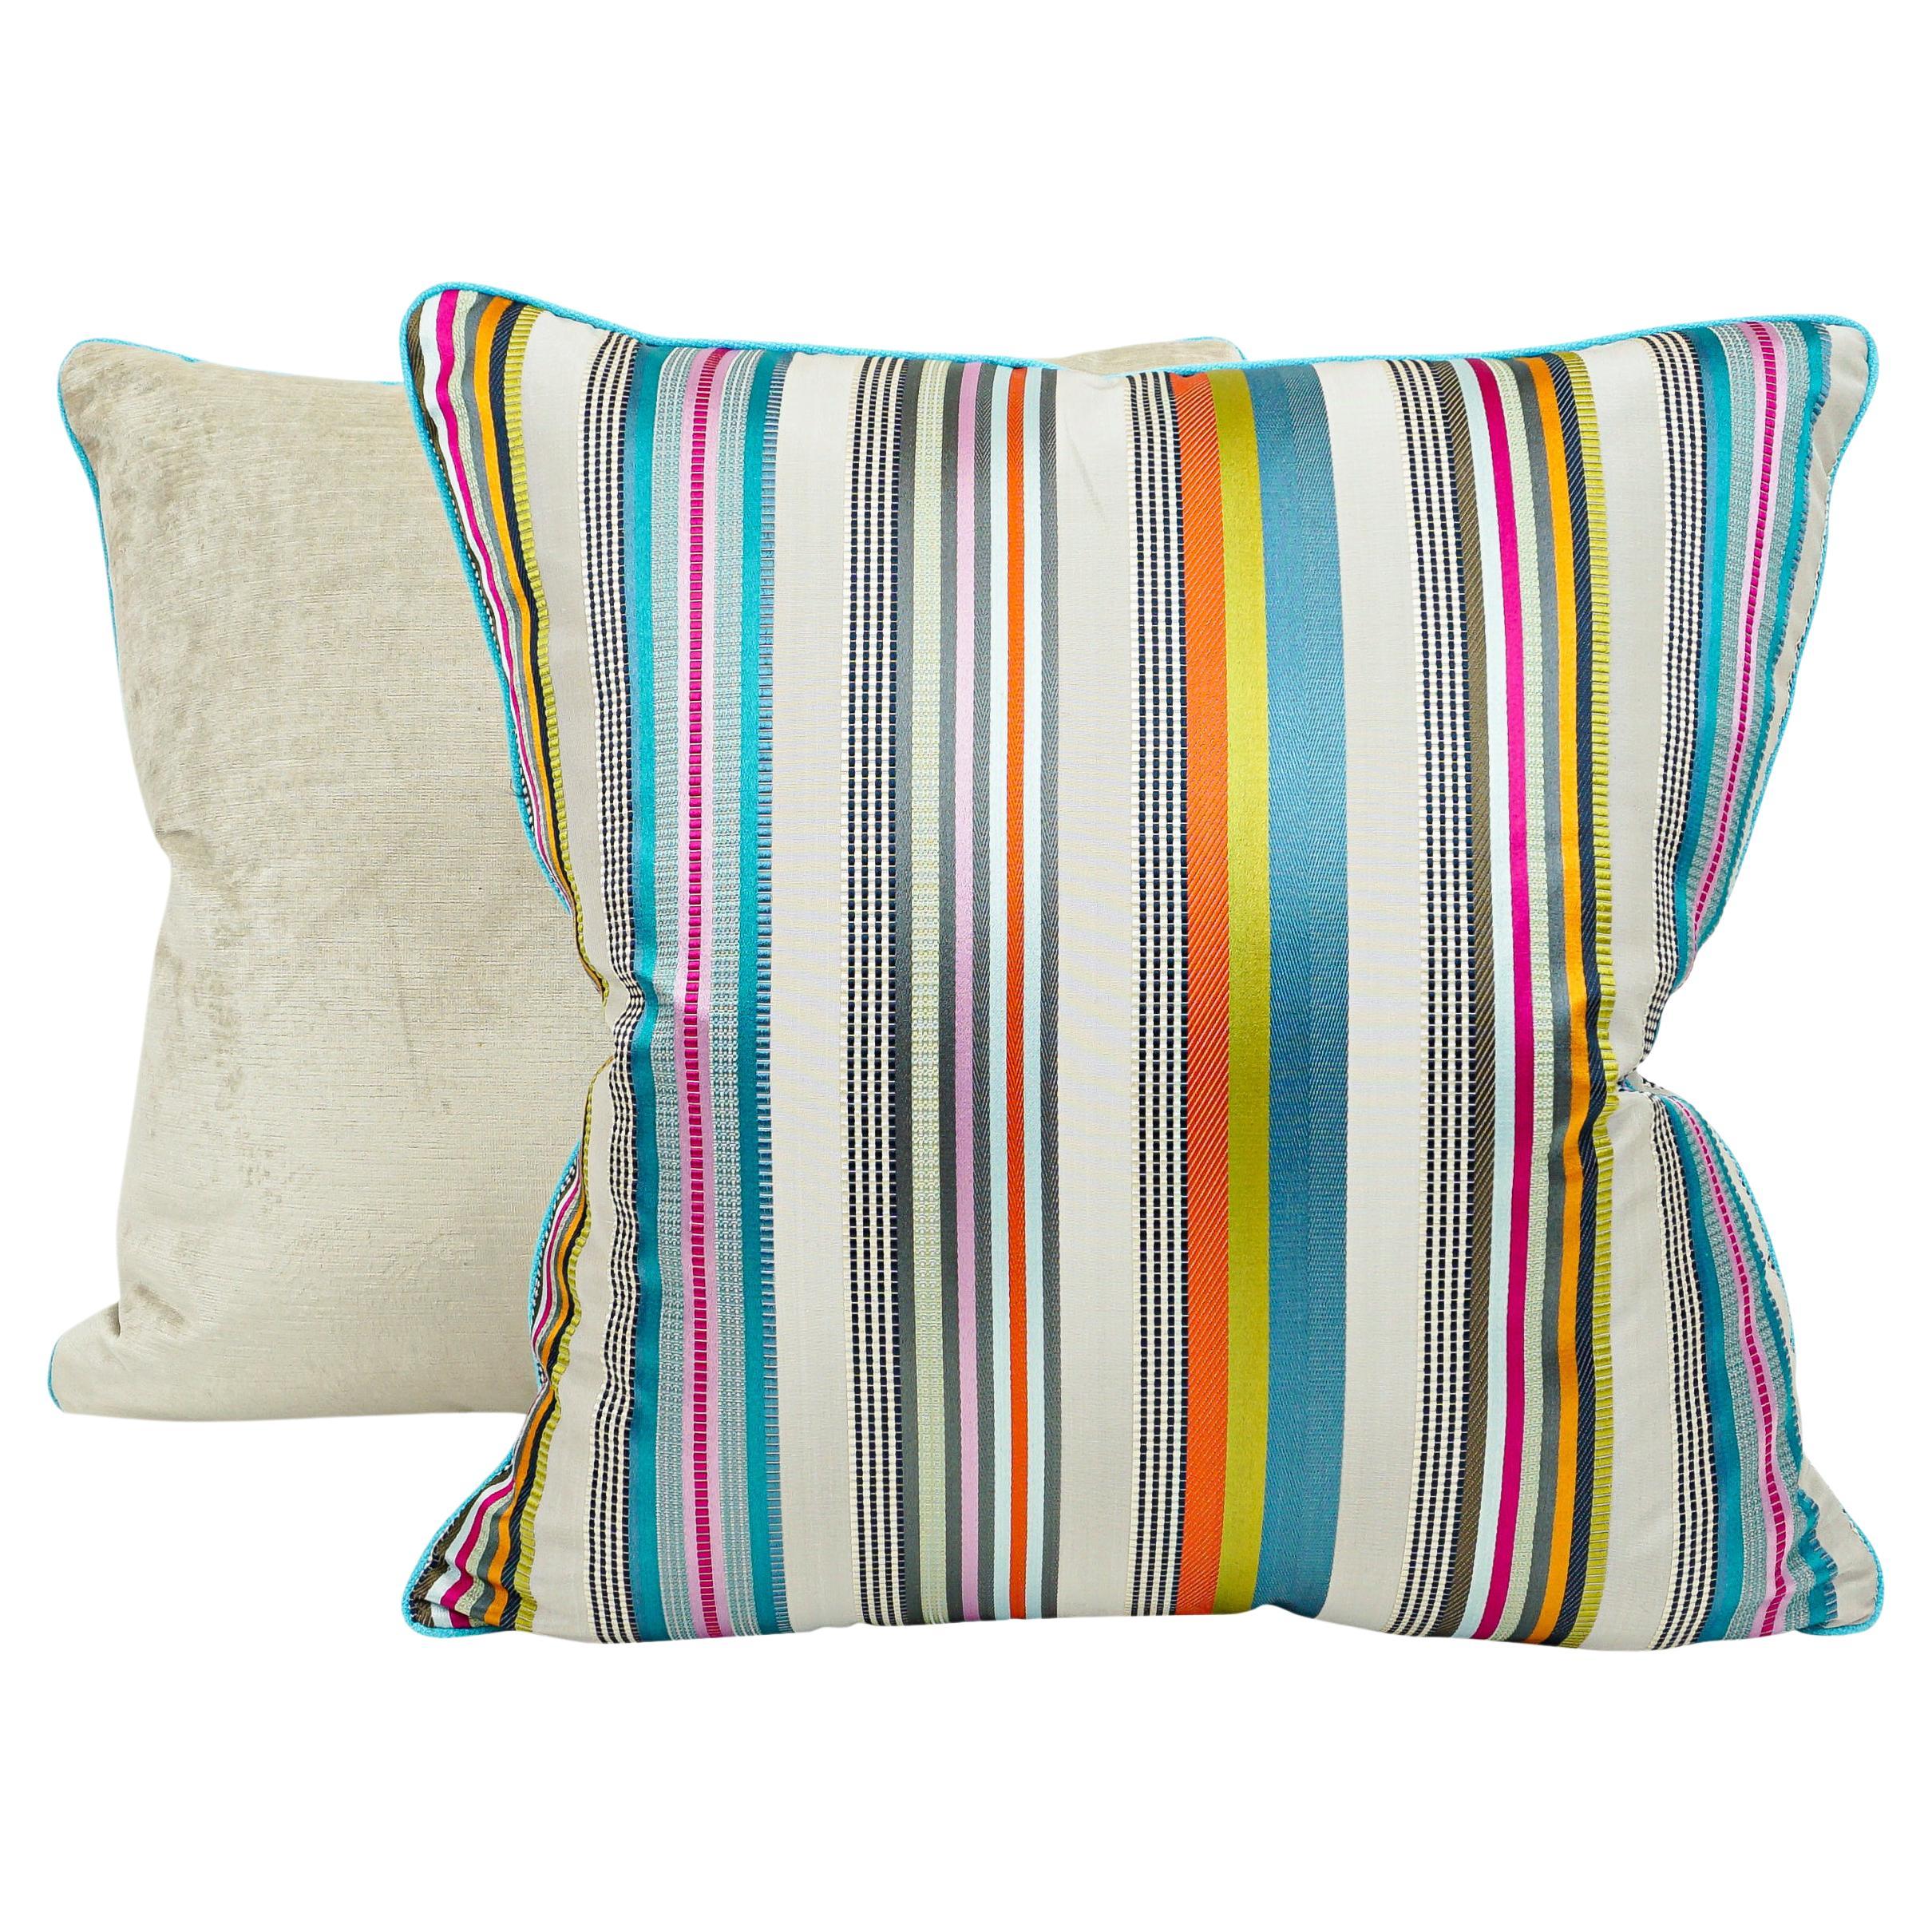 Throw Pillows with Colorful Satin Stripes